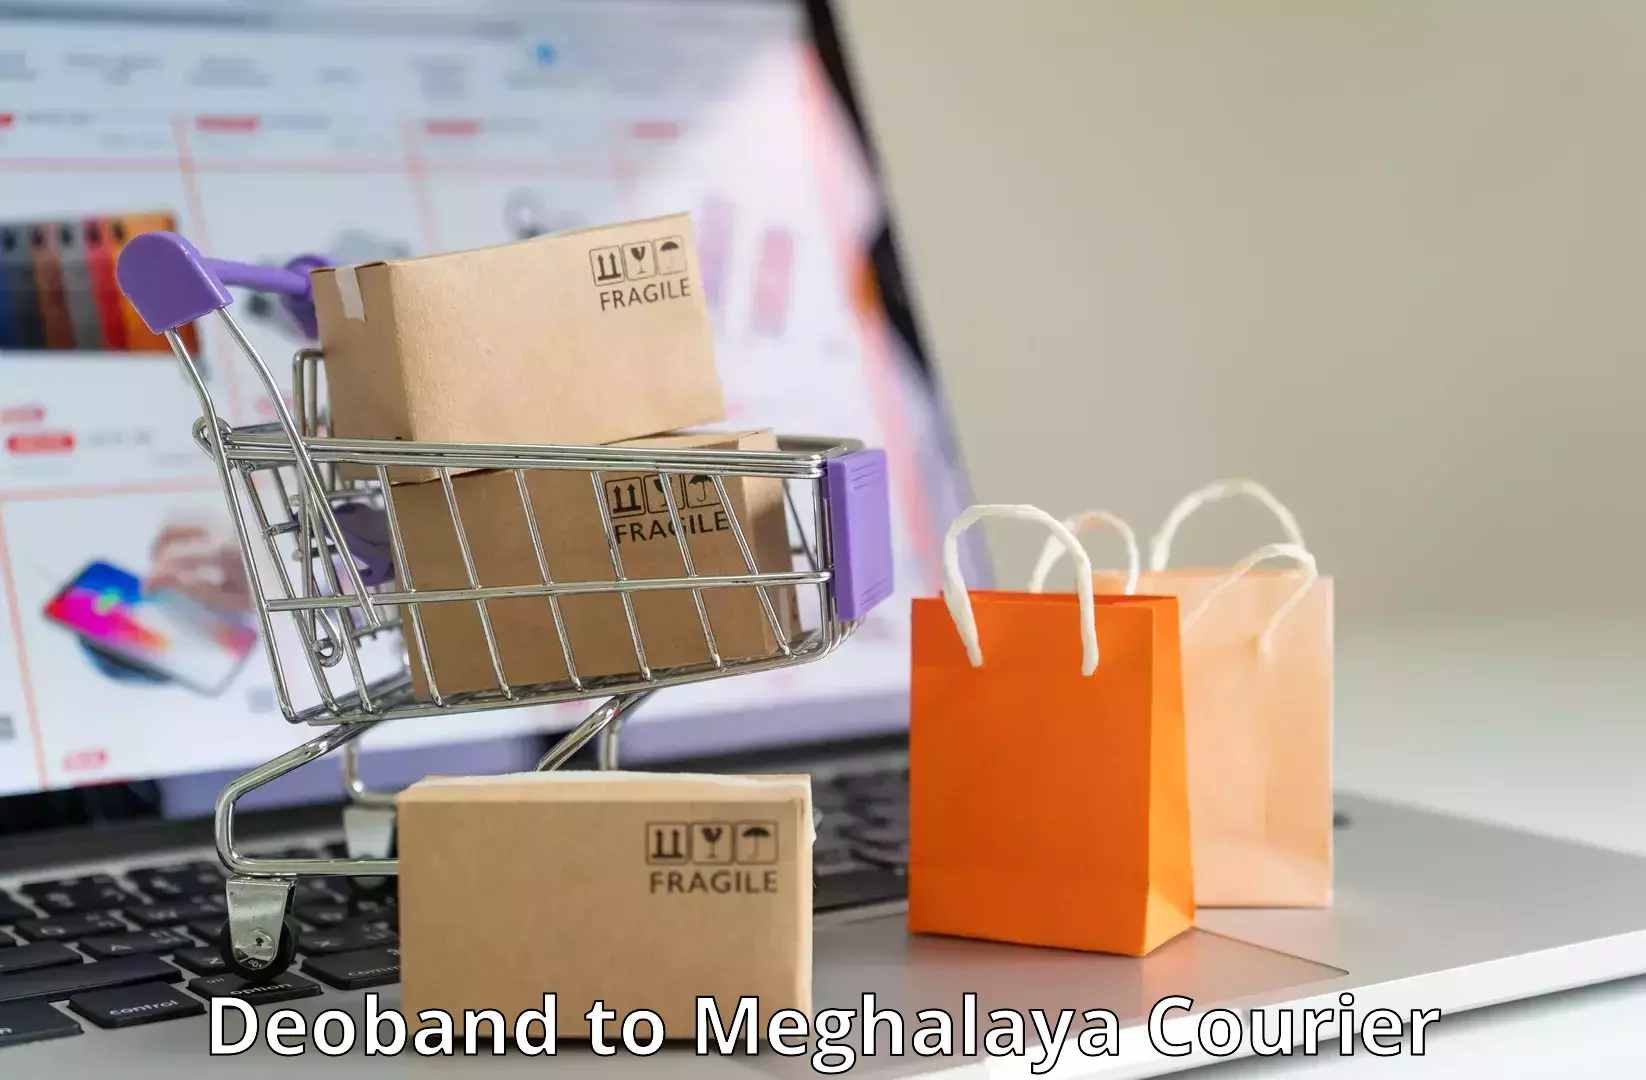 High-priority parcel service Deoband to Meghalaya